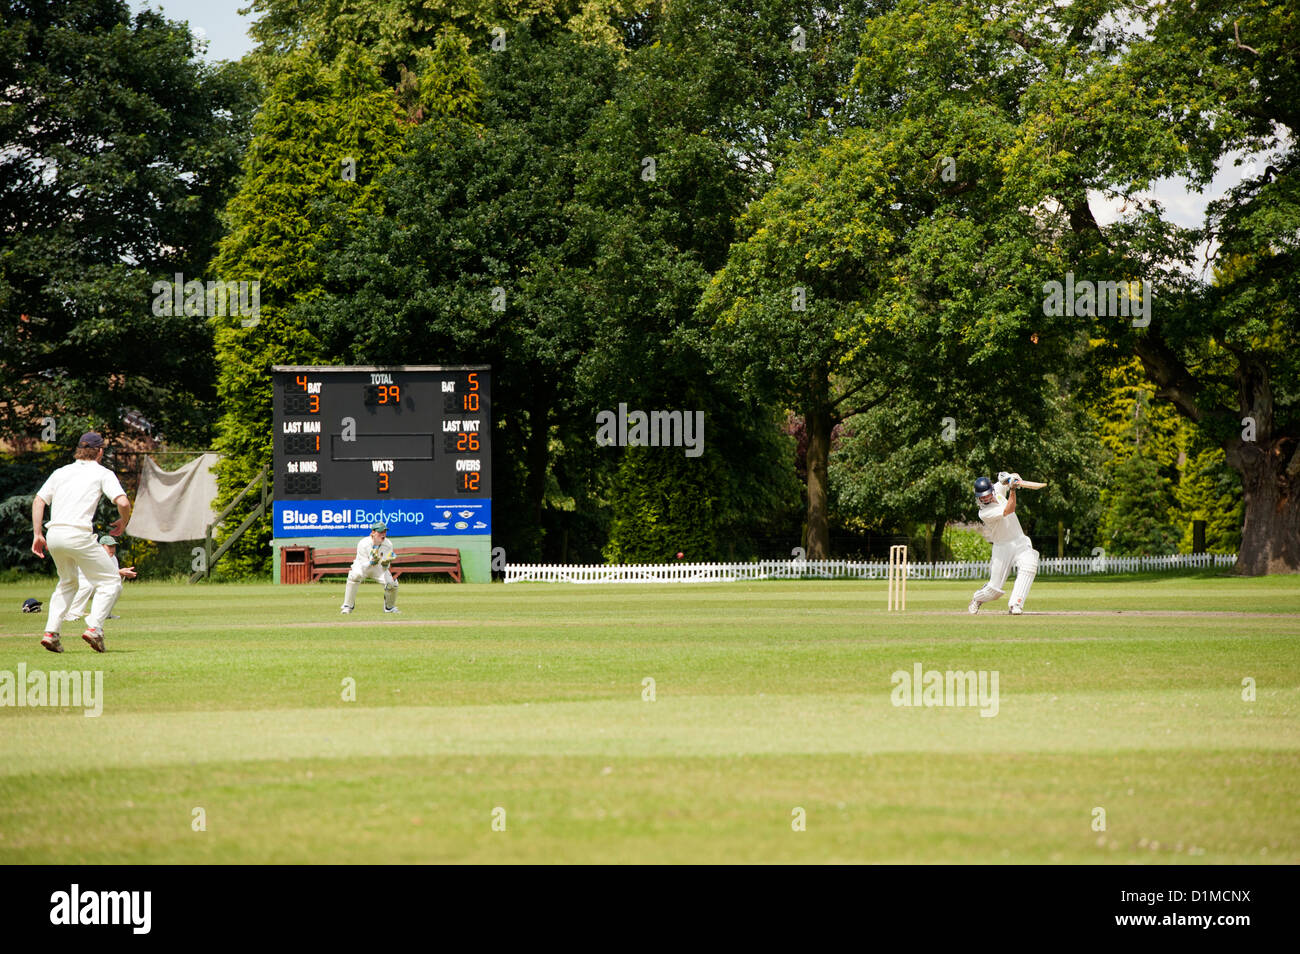 Game of cricket on a summers afternoon in an English village. Cheshire. Stock Photo